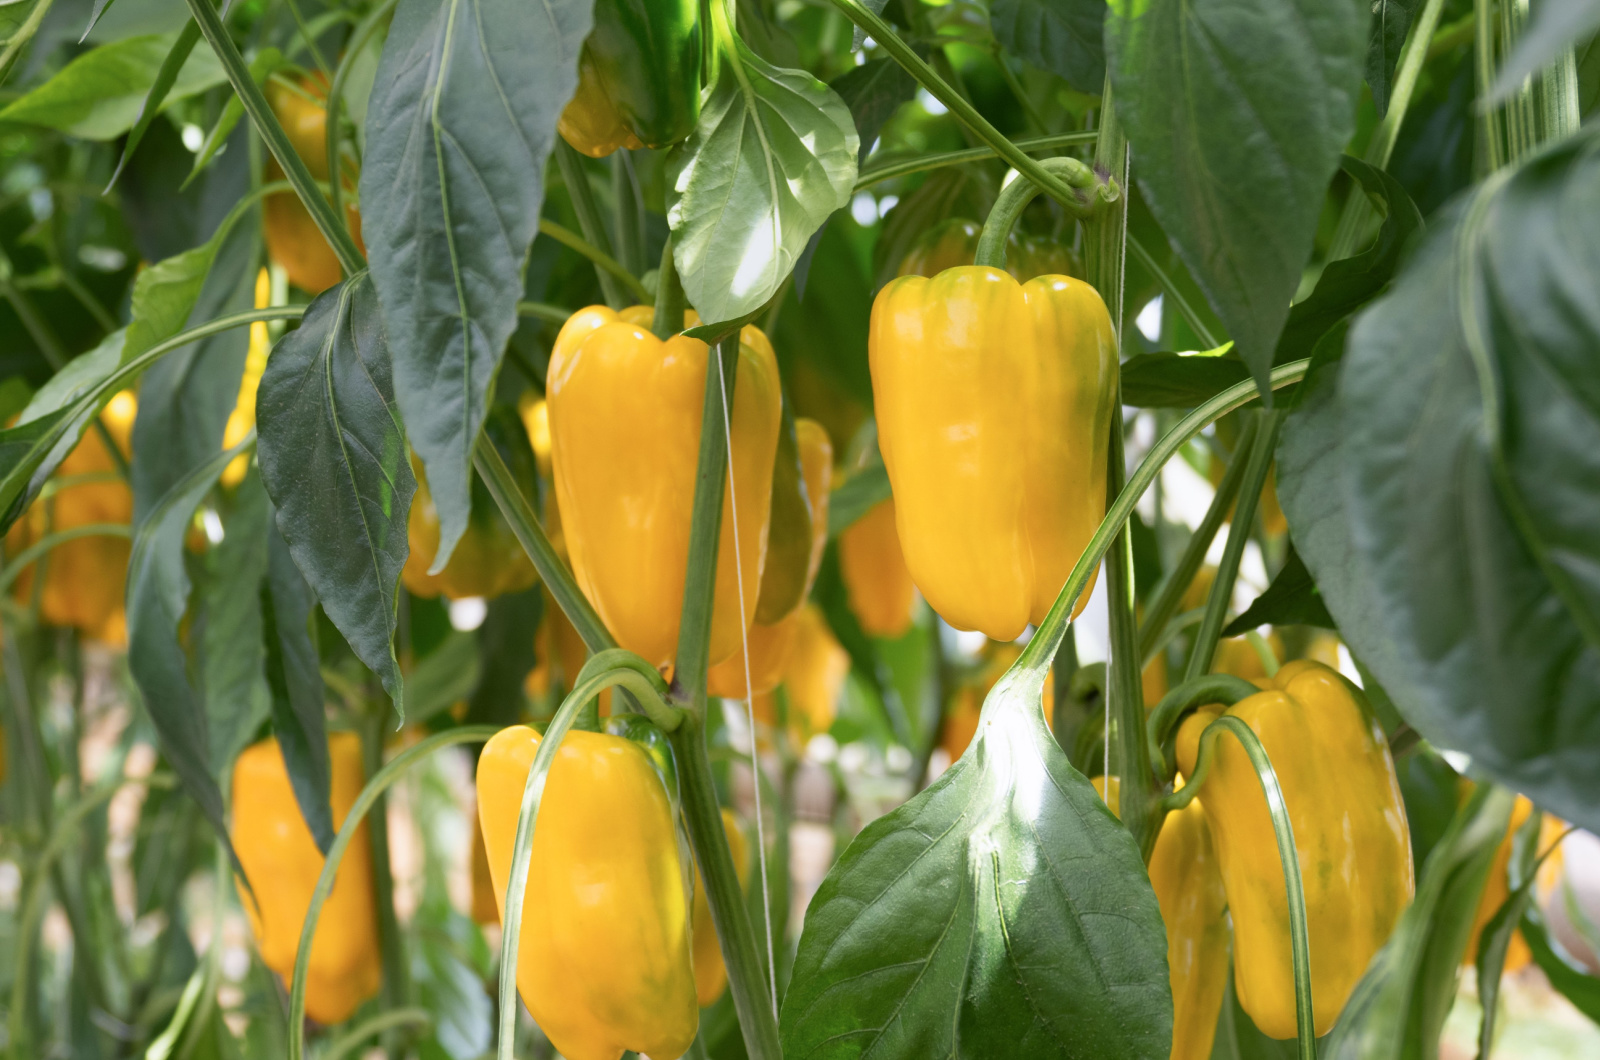 Cultivation of yellow peppers